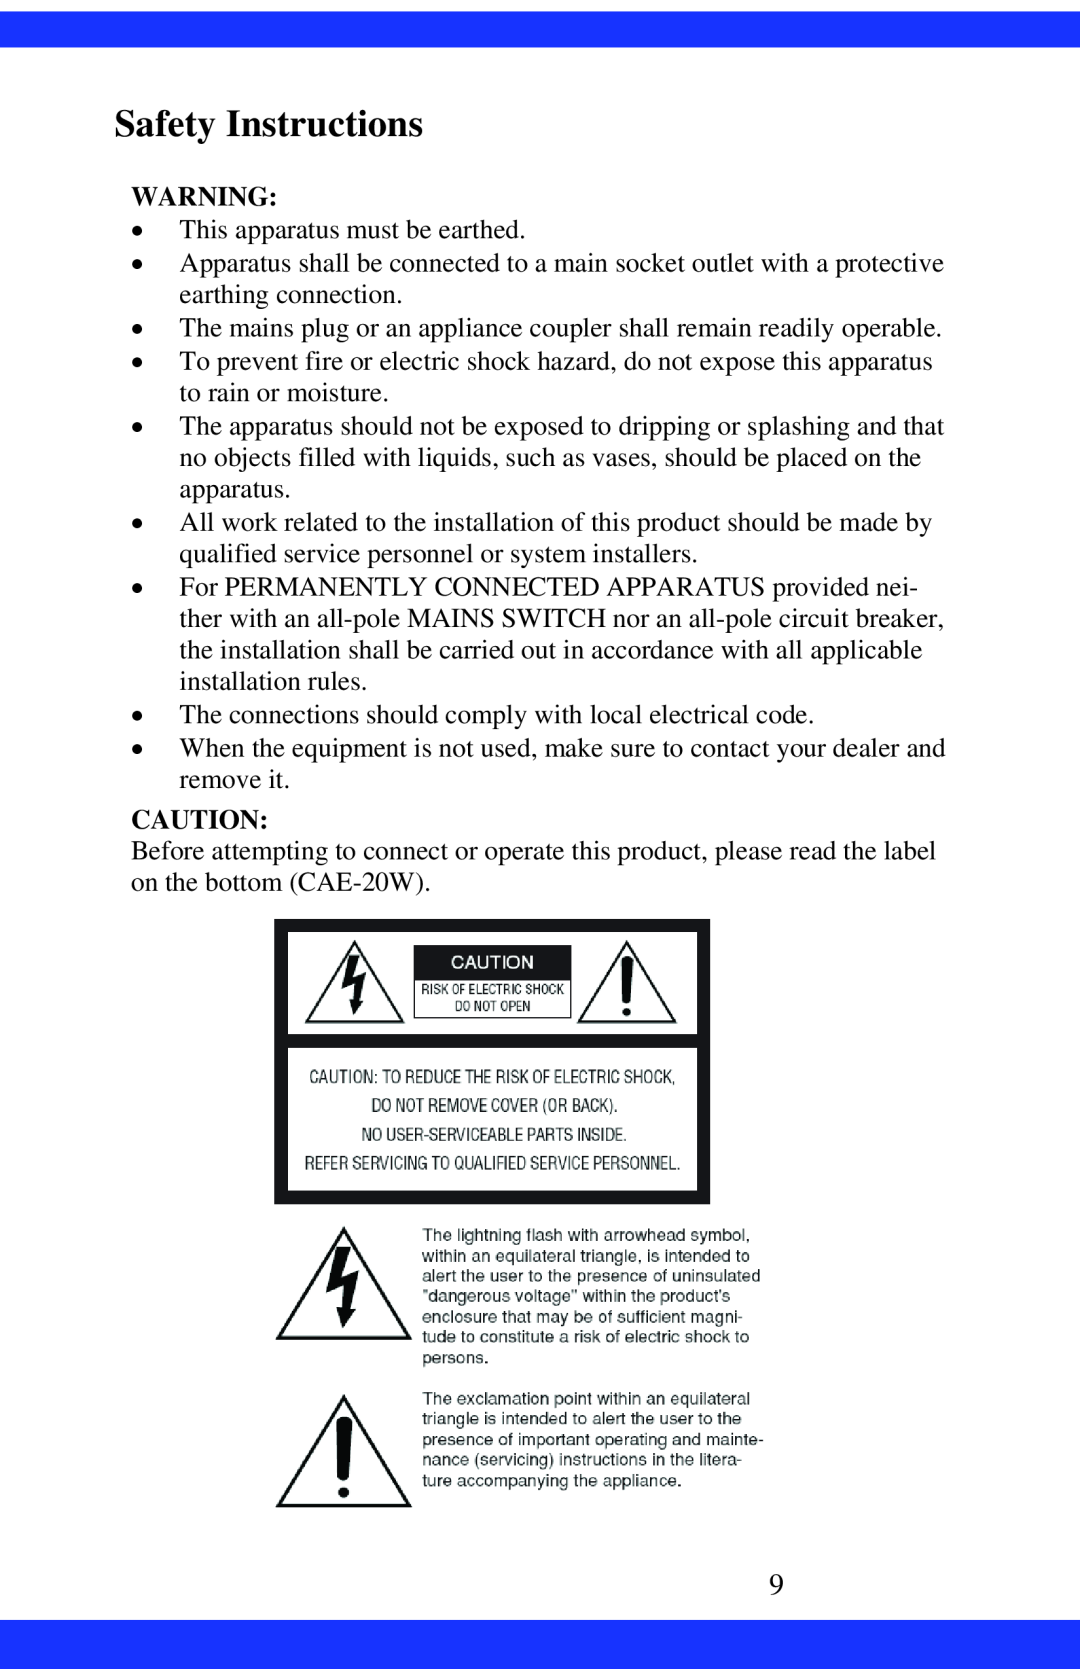 Dukane CAE-20W instruction manual Safety Instructions, •This apparatus must be earthed 